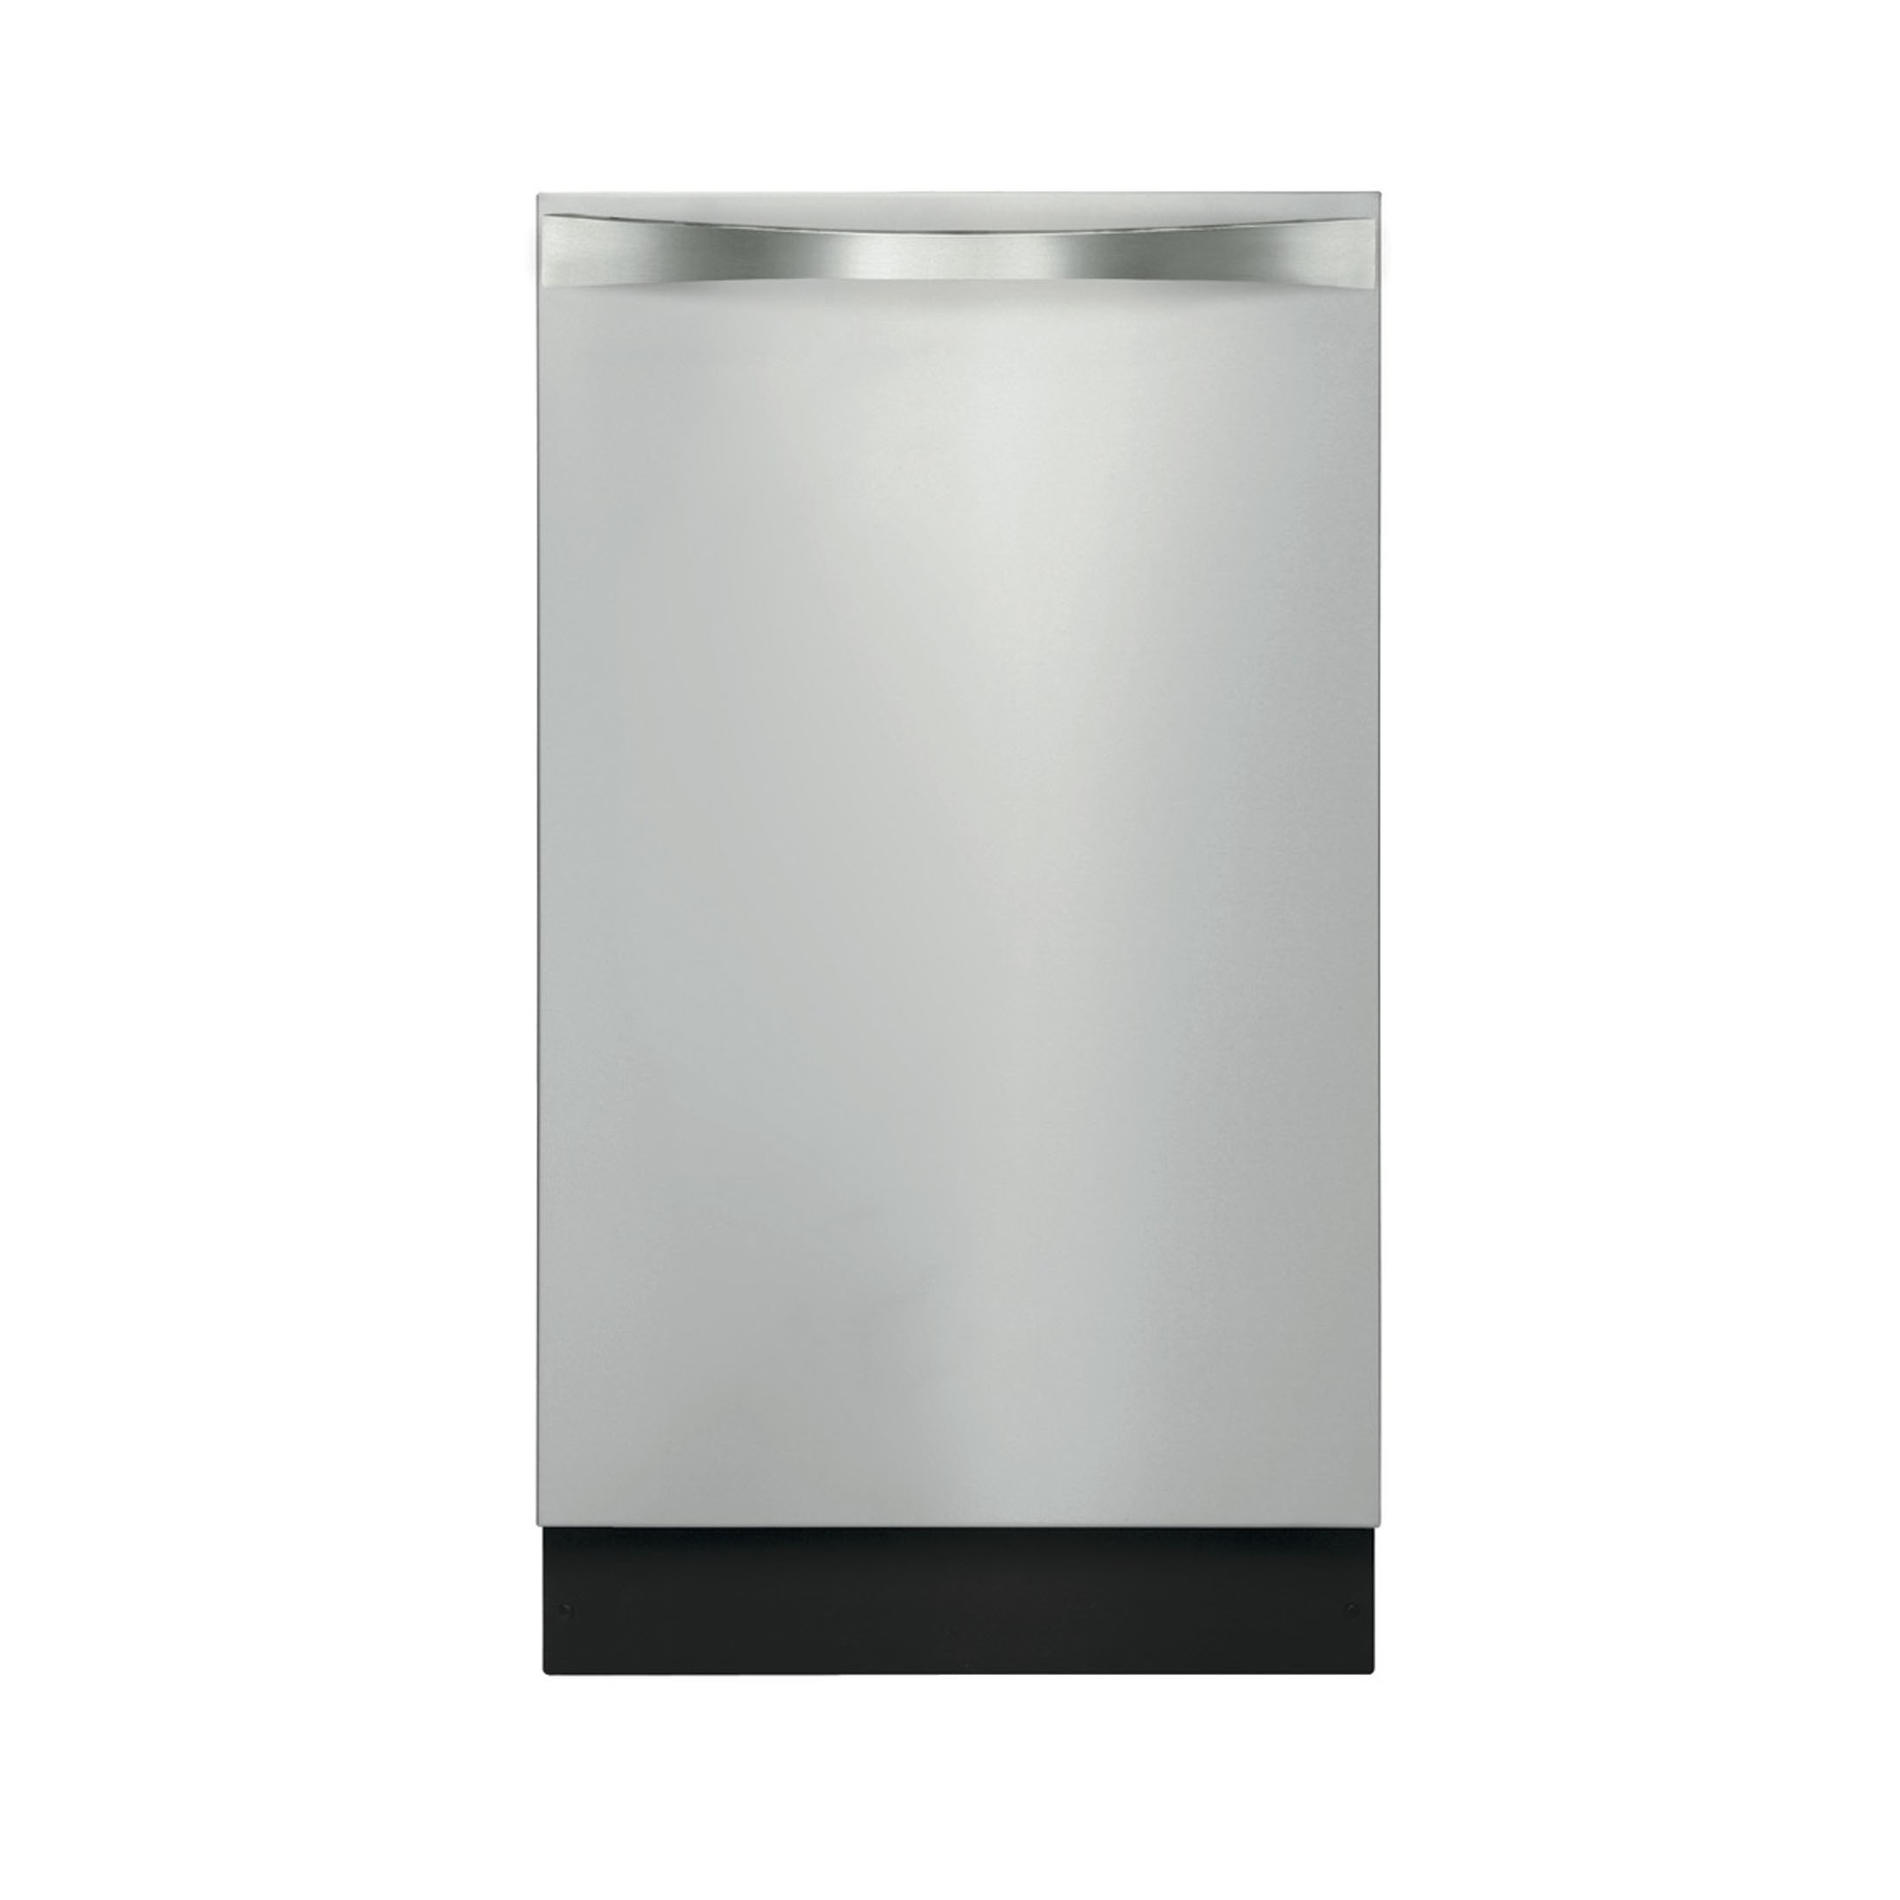 0012505113154 - 14683 18 BUILT-IN DISHWASHER - STAINLESS STEEL